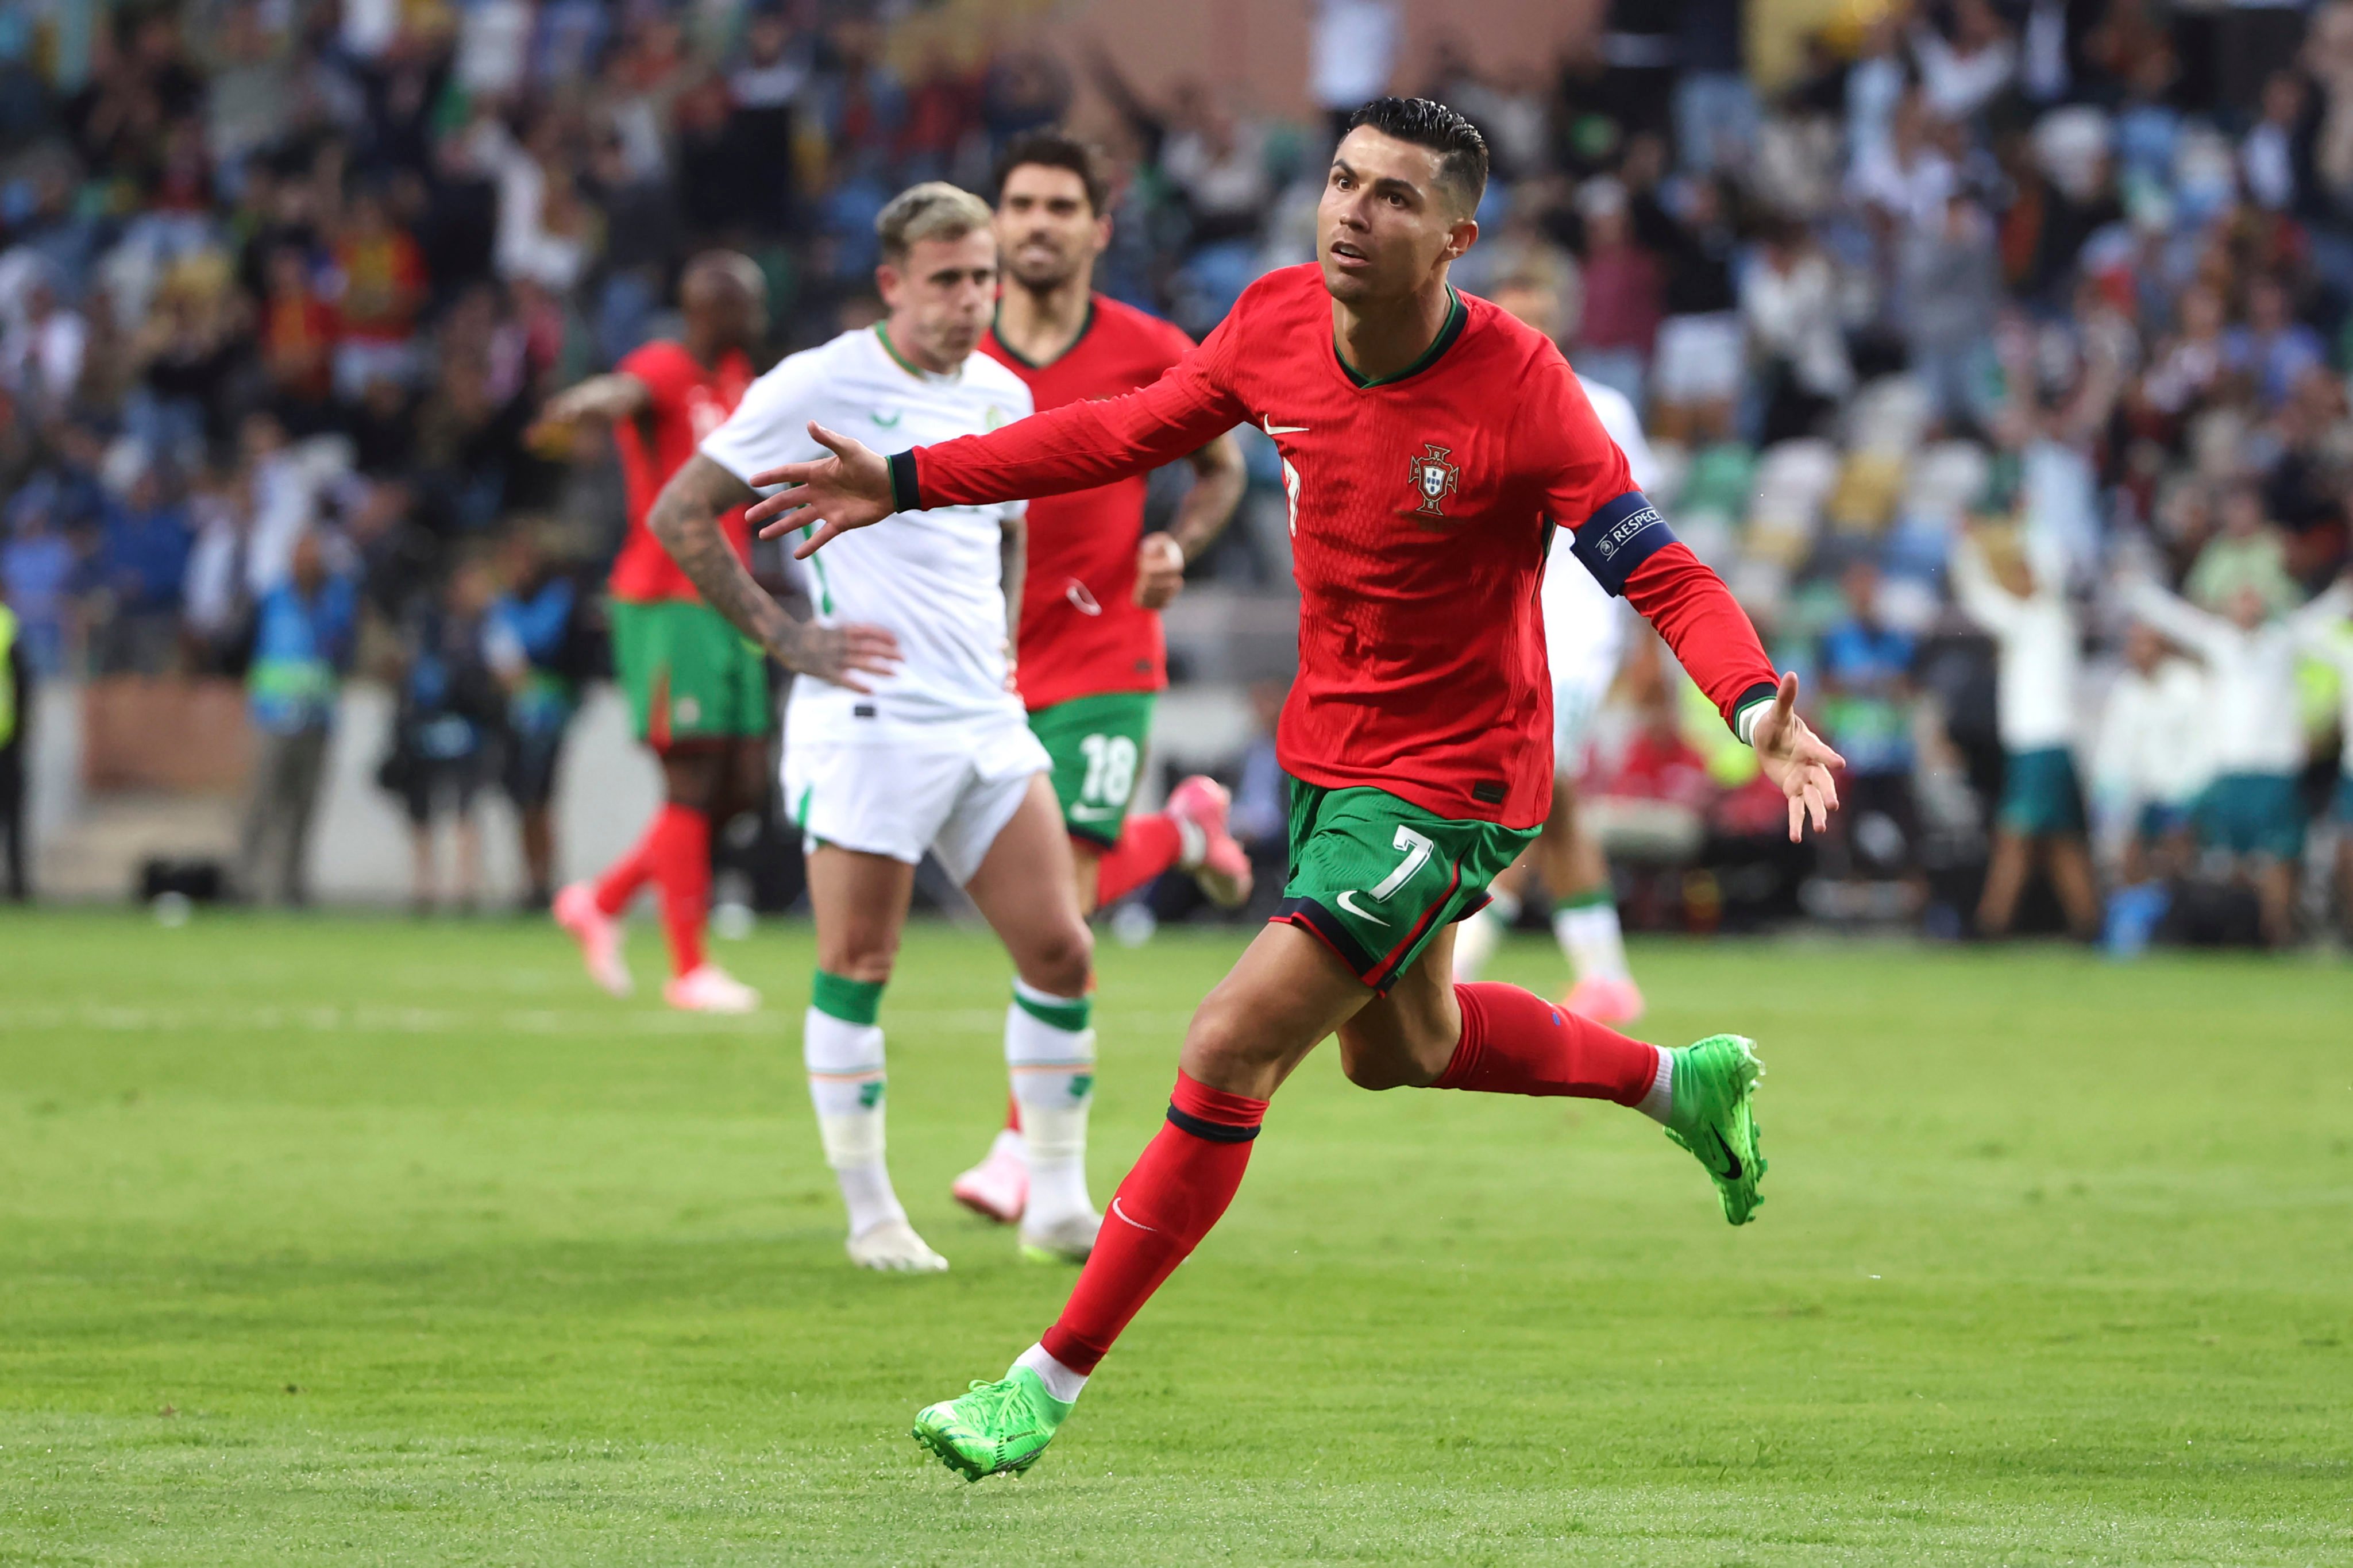 Cristiano Ronaldo is gearing up for his 11th major tournament at the European Championship in Germany. Photo: AP